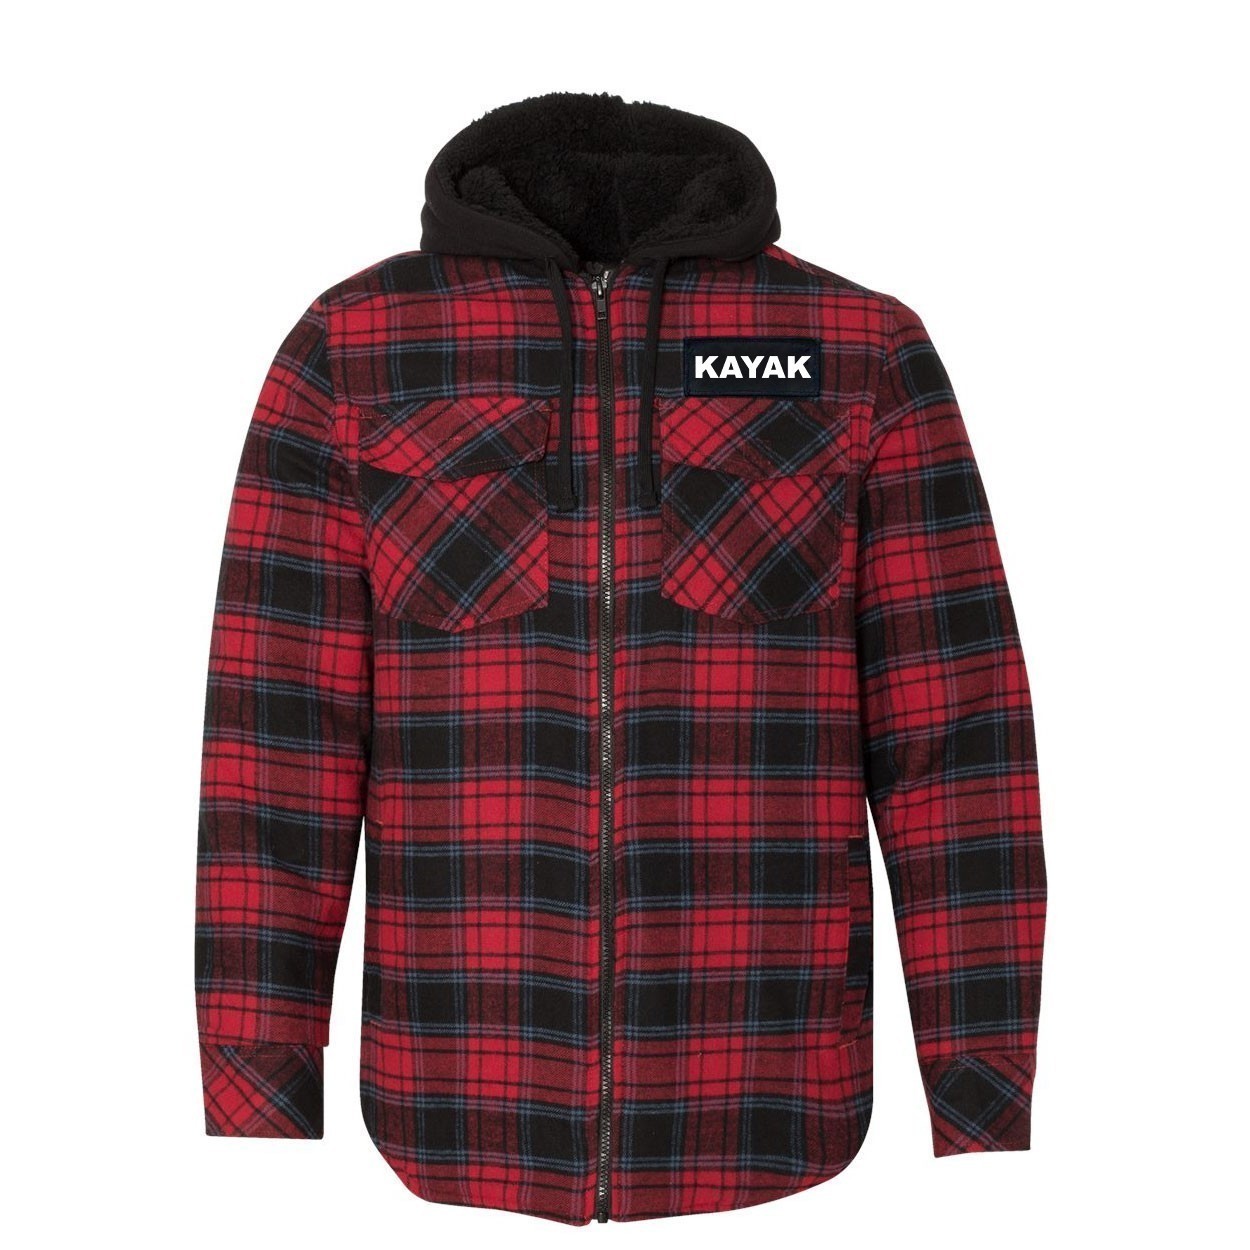 Kayak Brand Logo Classic Unisex Full Zip Woven Patch Hooded Flannel Jacket Red/Black Buffalo